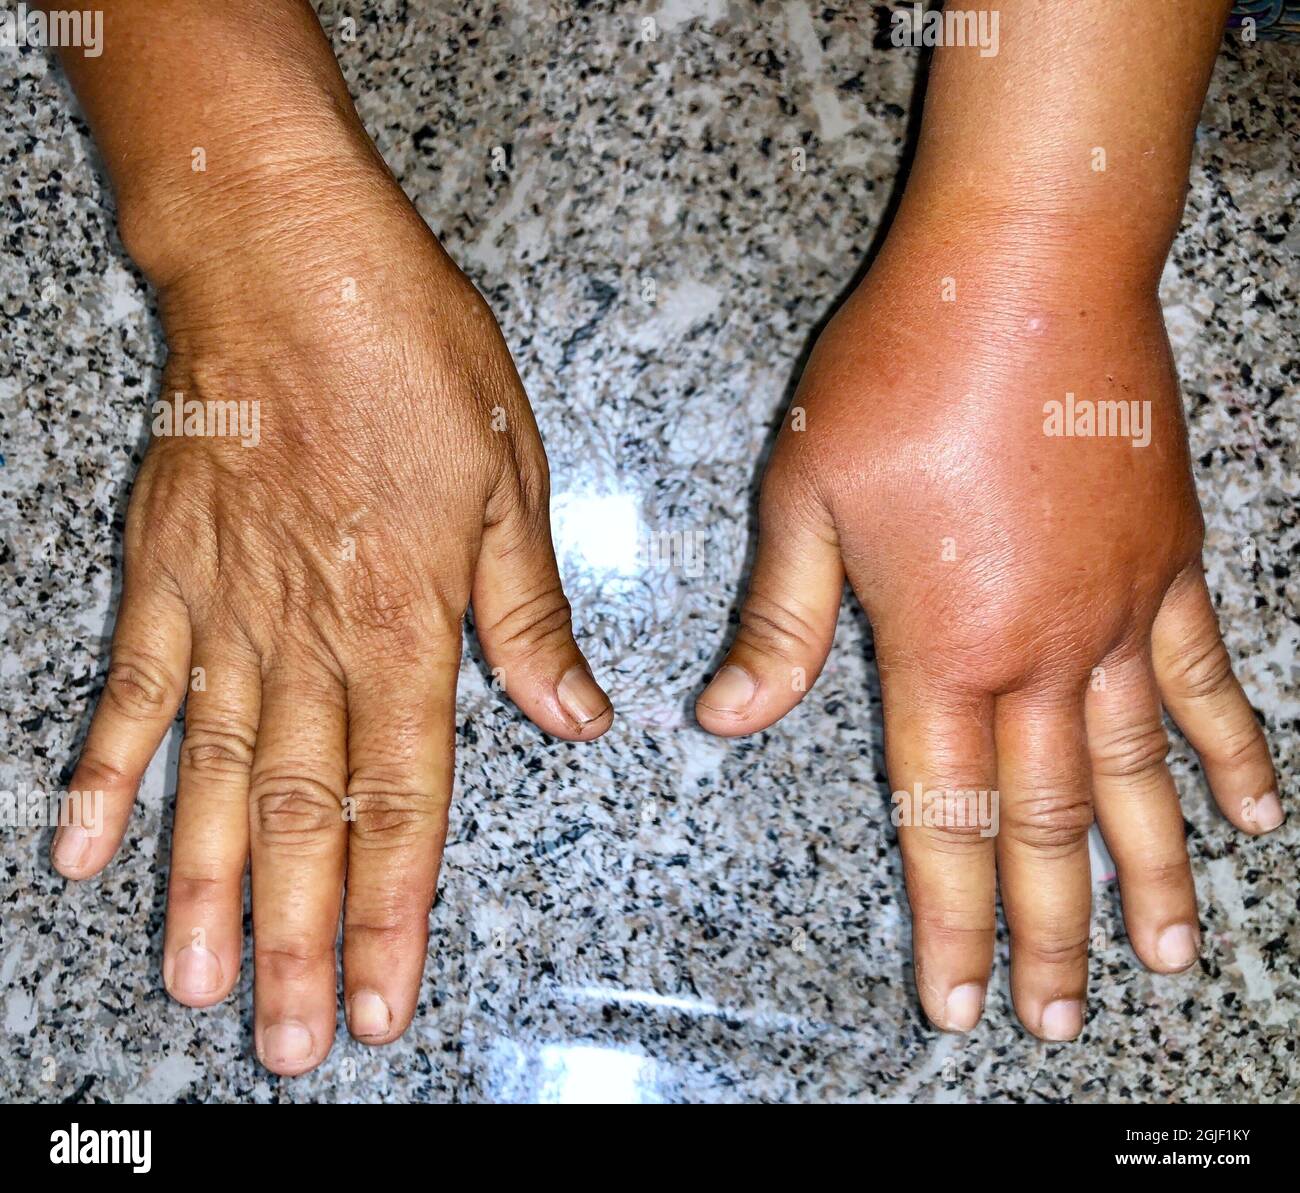 Unilateral Edema Of Upper Limb Swollen Hand And Arm Of Asian Woman